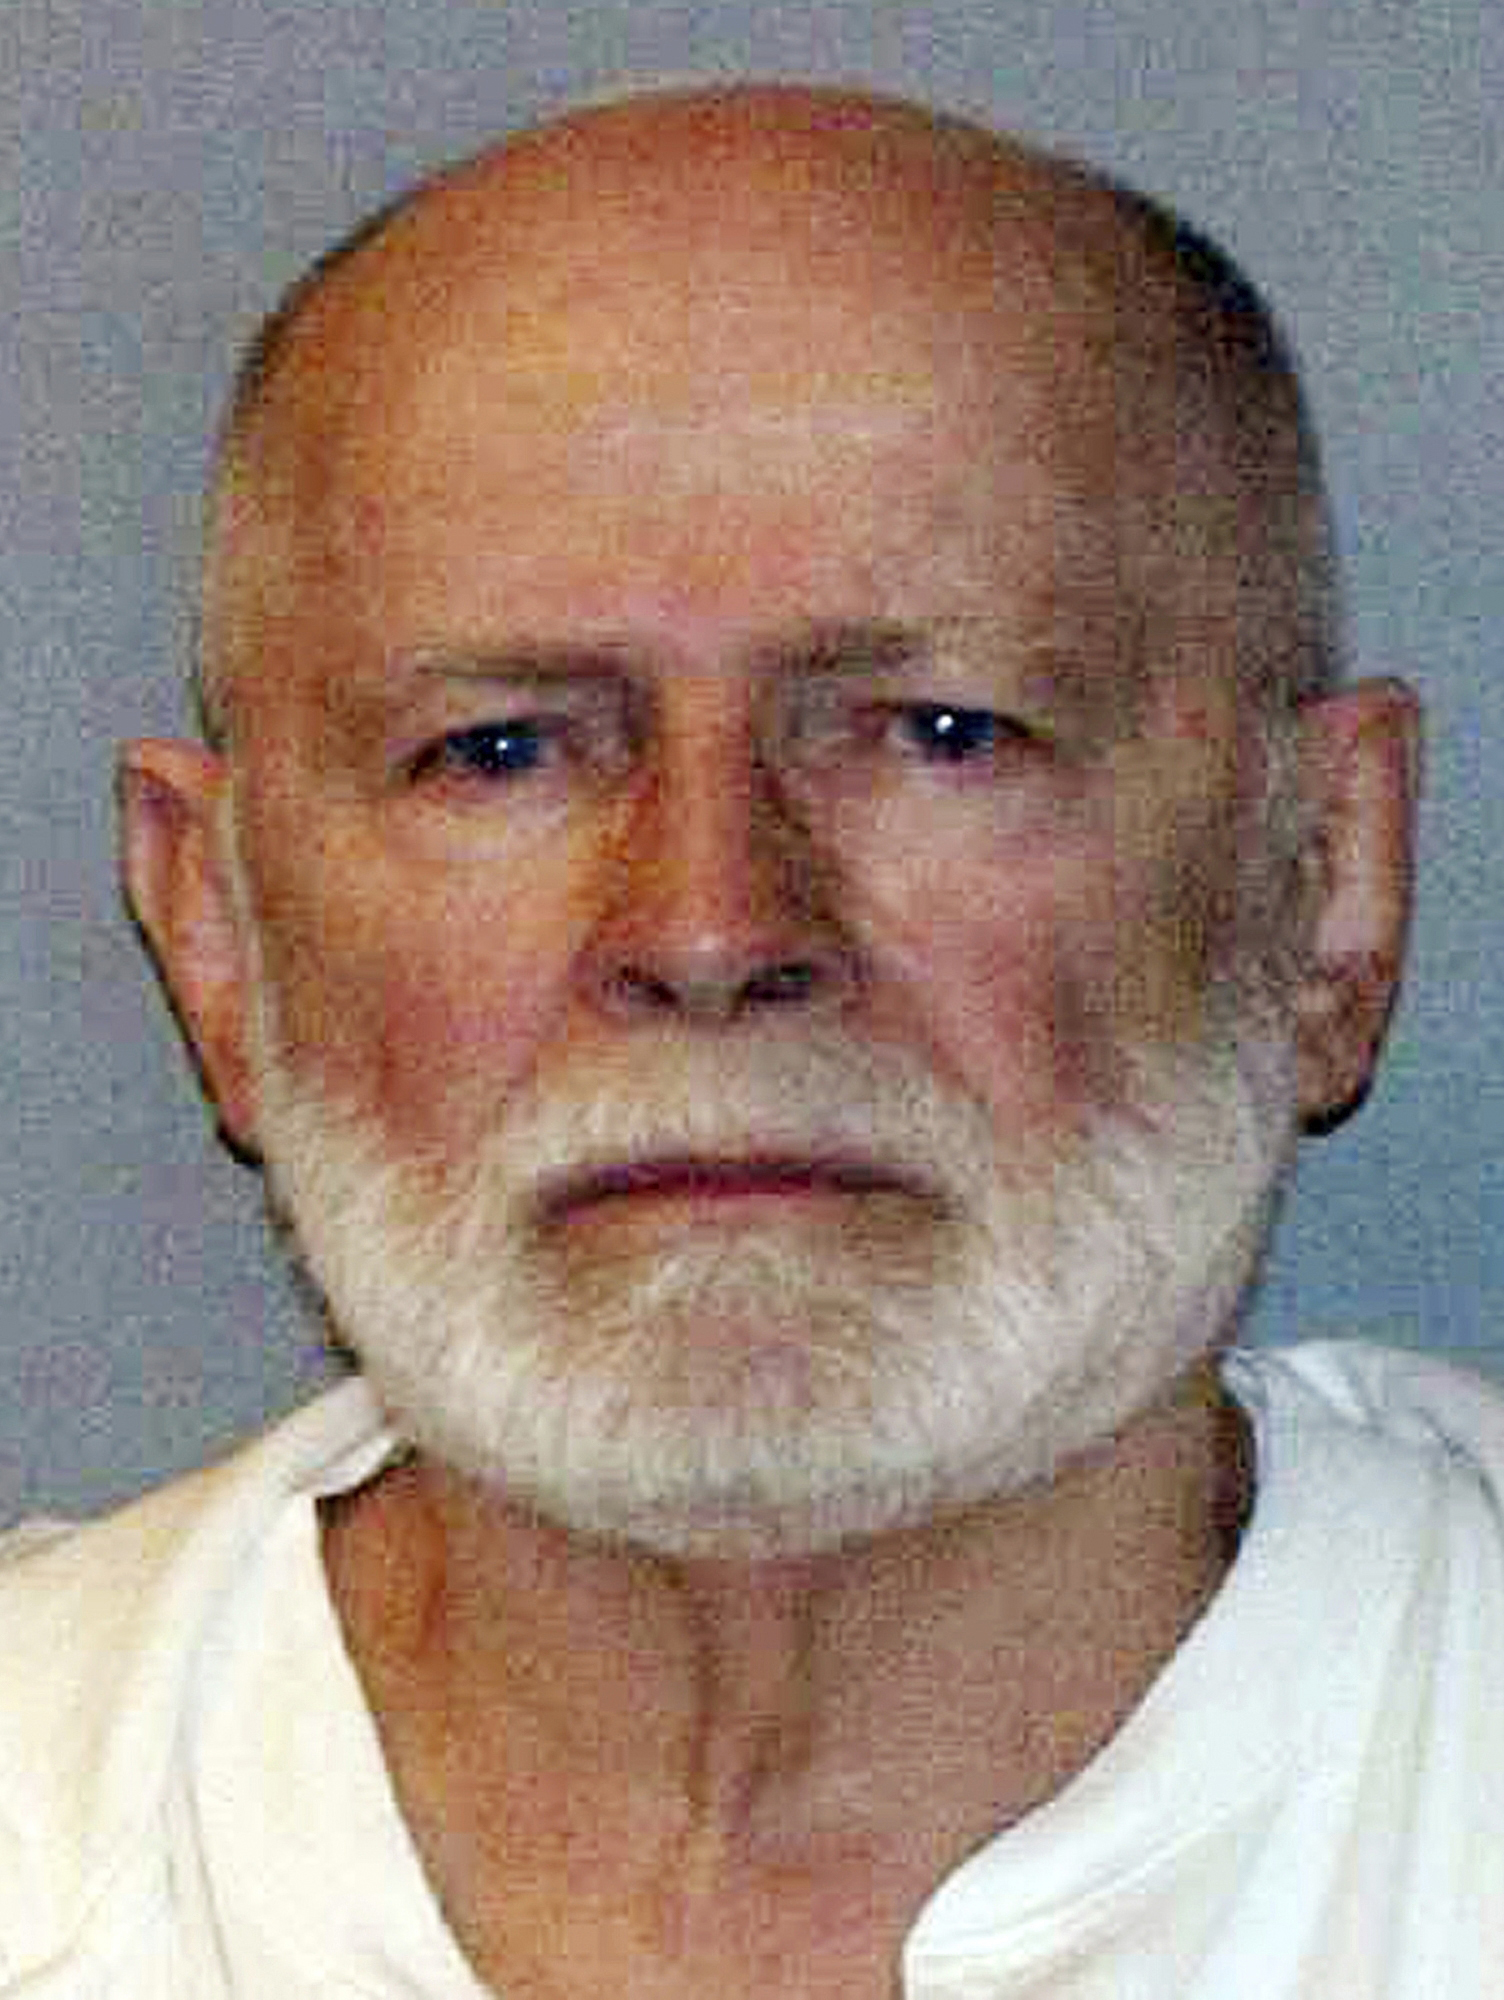 PHOTO: Booking photo provided by the U.S. Marshals Service shows James "Whitey" Bulger.